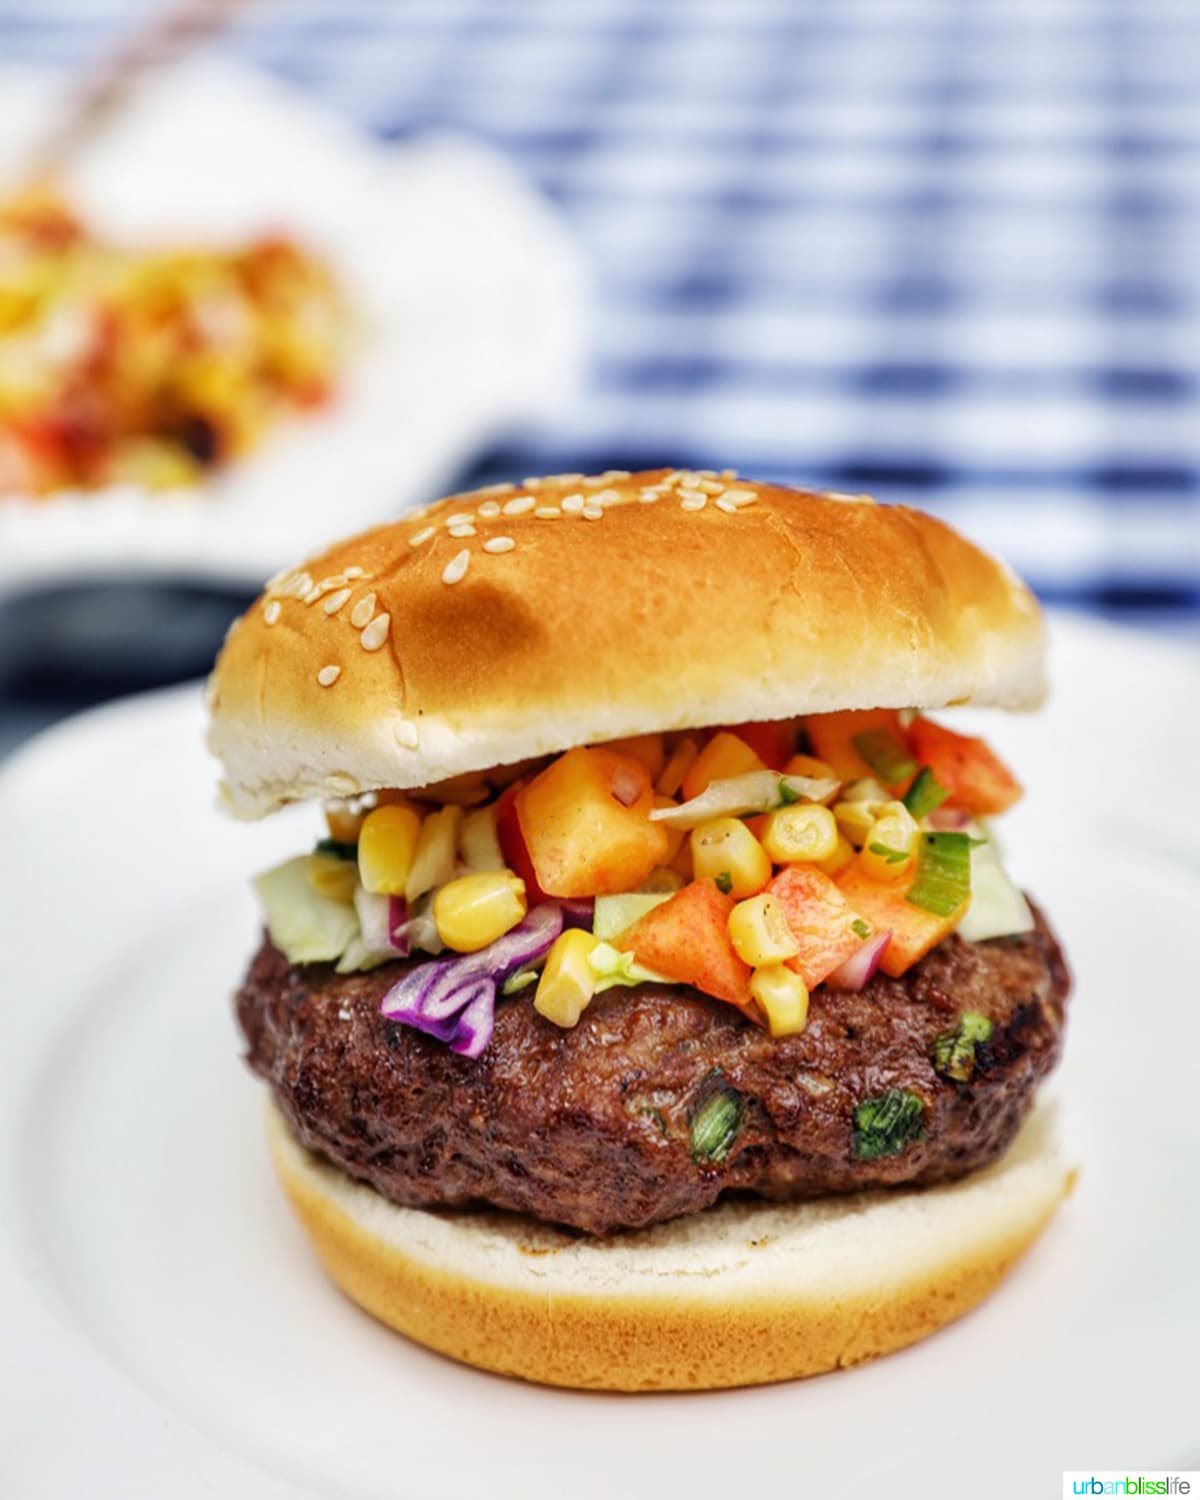 Asian beef burger with corn and cabbage slaw on a white plate.